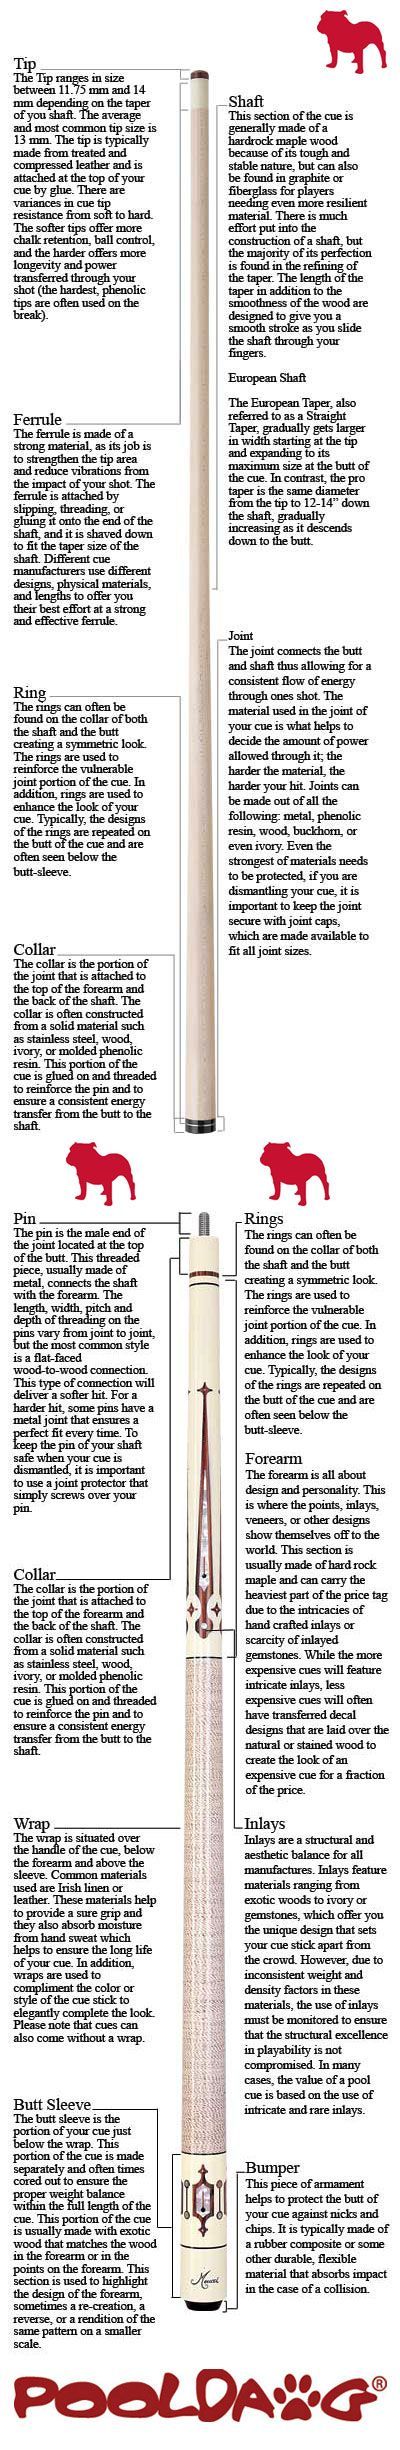 Anatomy of a Pool Cue